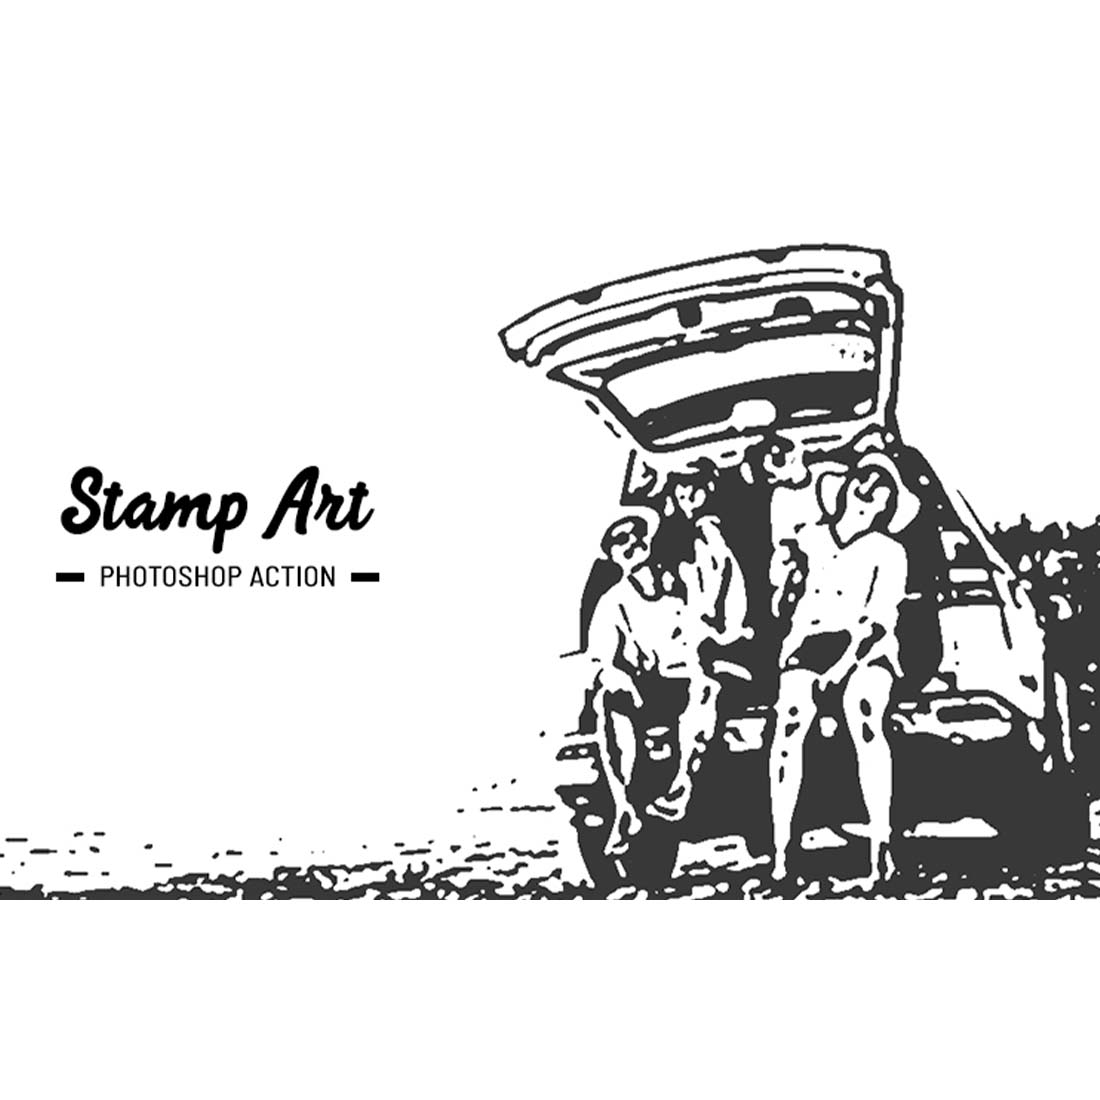 Stamp Art Photoshop Action cover image.